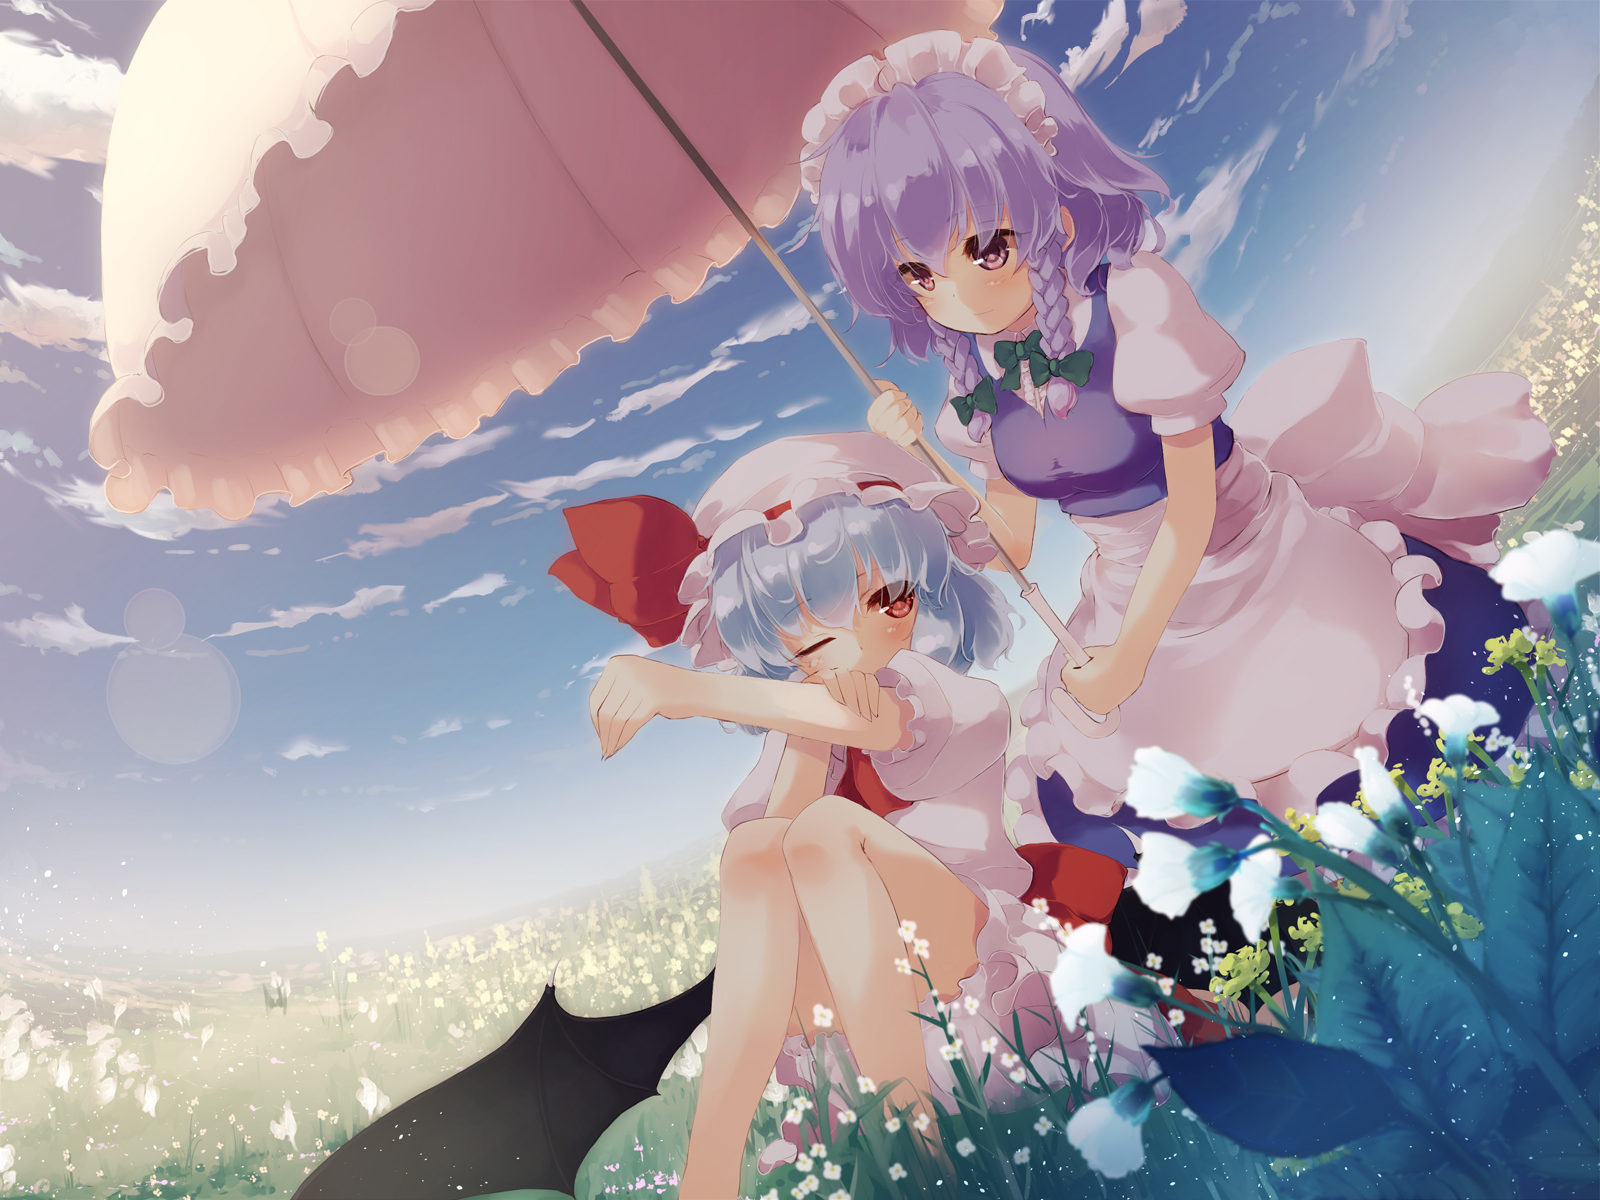 Anime 1600x1200 anime anime girls Remilia Scarlet Touhou Izayoi Sakuya umbrella sunlight flowers sky clouds maid maid outfit braids bow tie one eye closed wings leaves